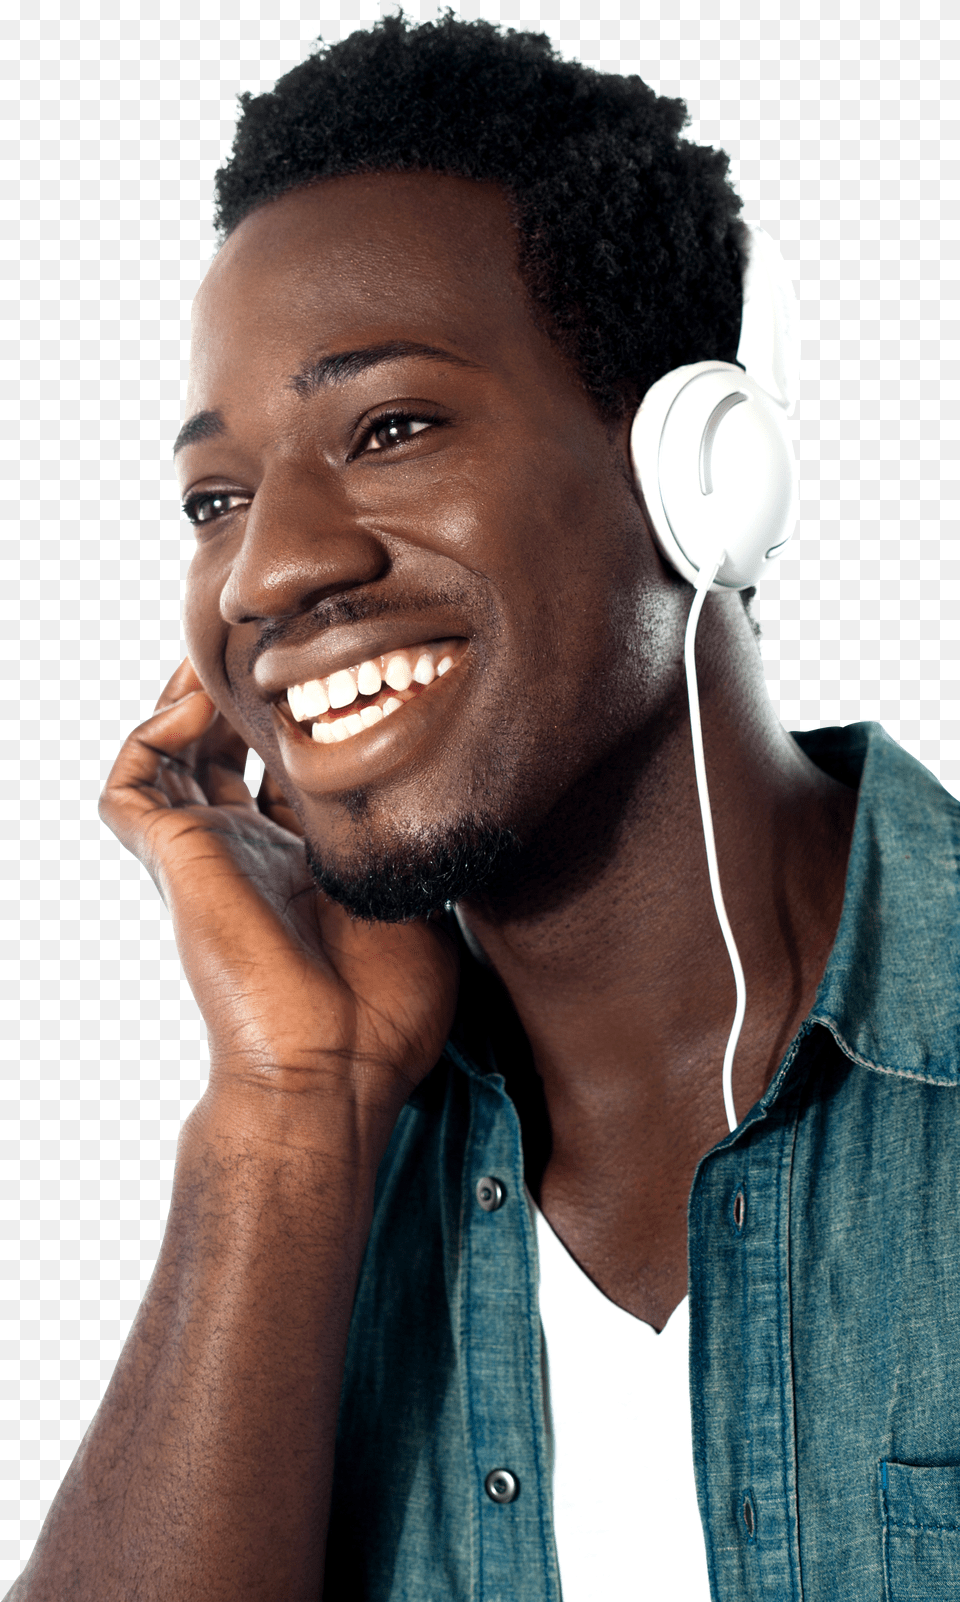 Listening Music Images Background Play Music Listening With Headphones Photo Hd Free Transparent Png